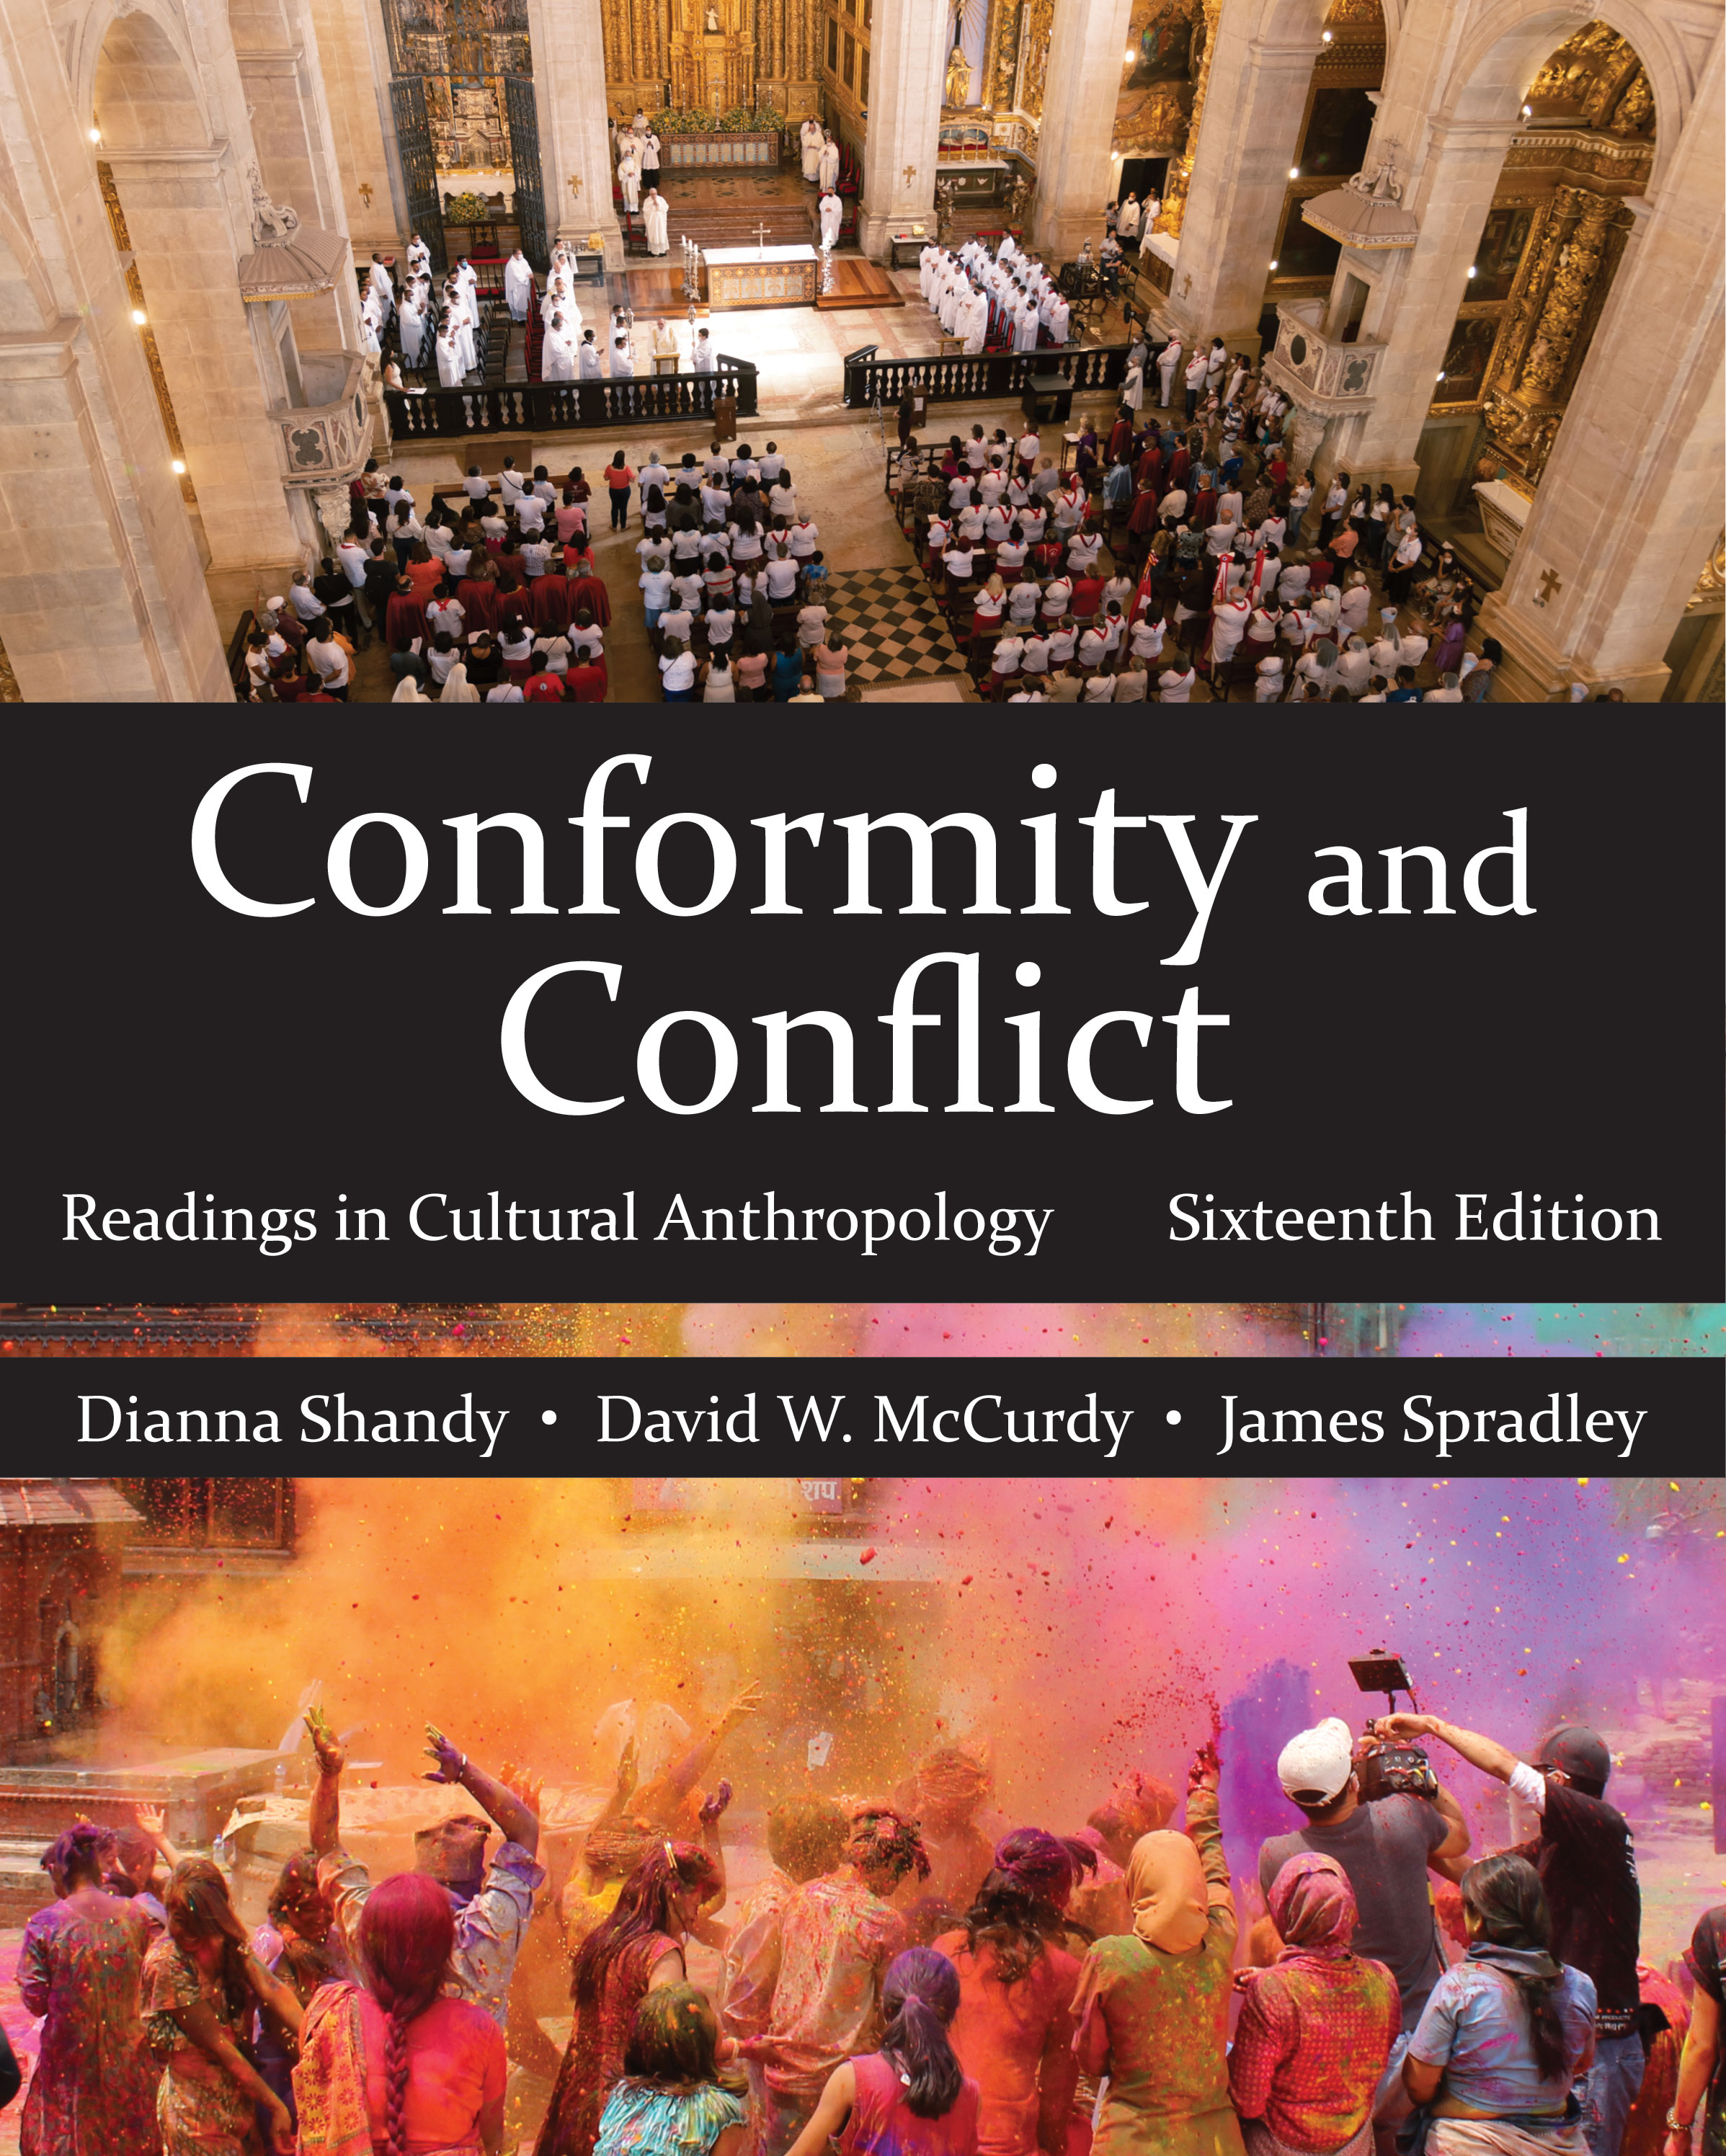 Conformity and Conflict: Readings in Cultural Anthropology, Sixteenth Edition by Dianna J. Shandy, David W. McCurdy, James P. Spradley